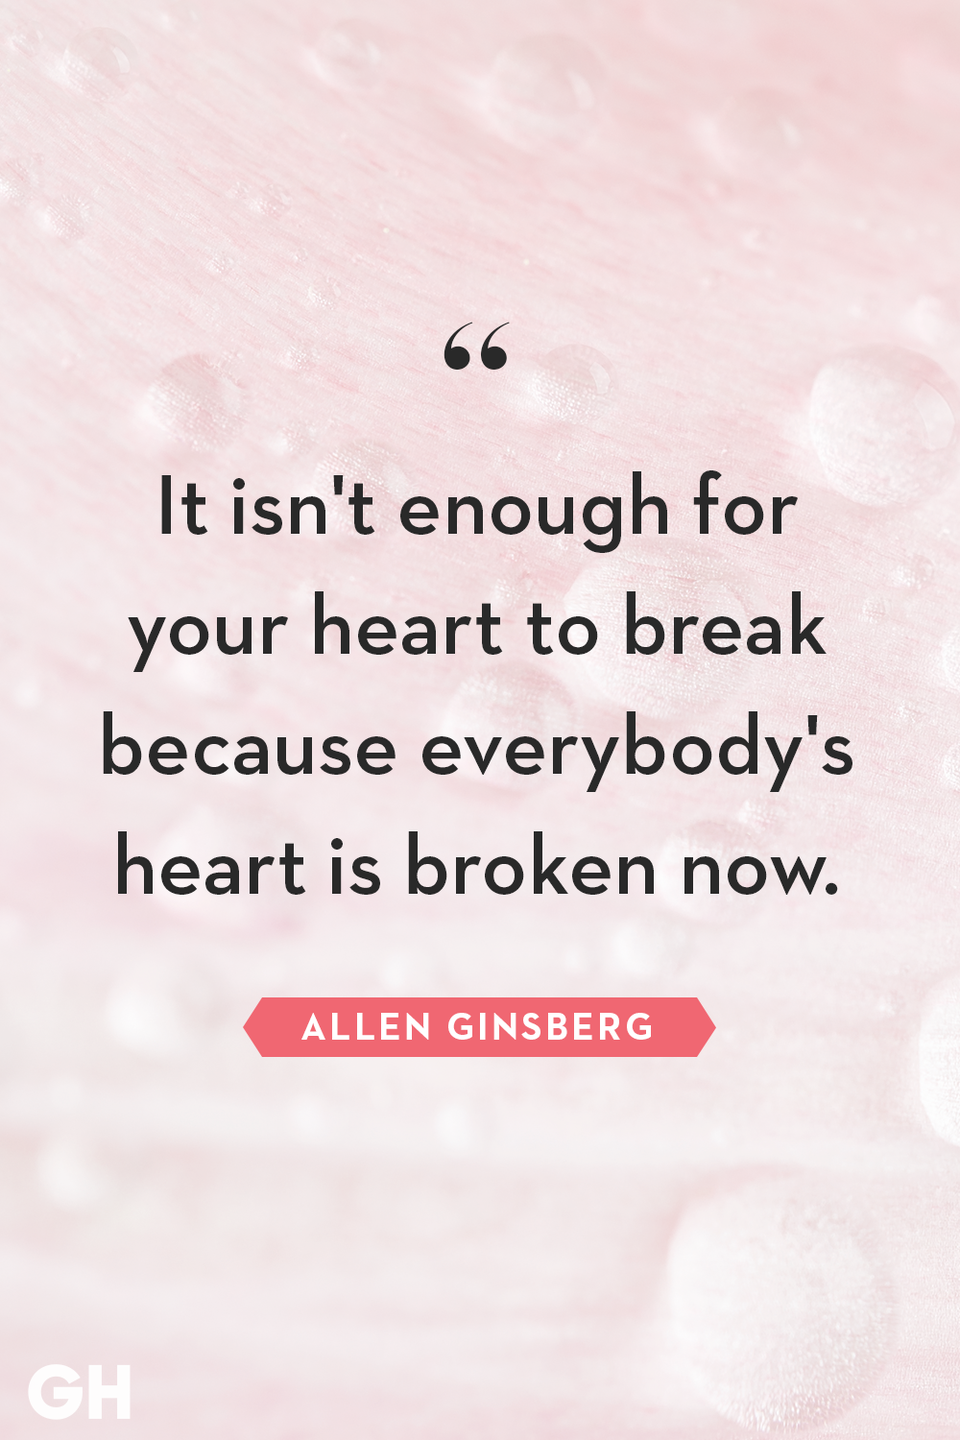 <p>It isn't enough for your heart to break because everybody's heart is broken now.</p>